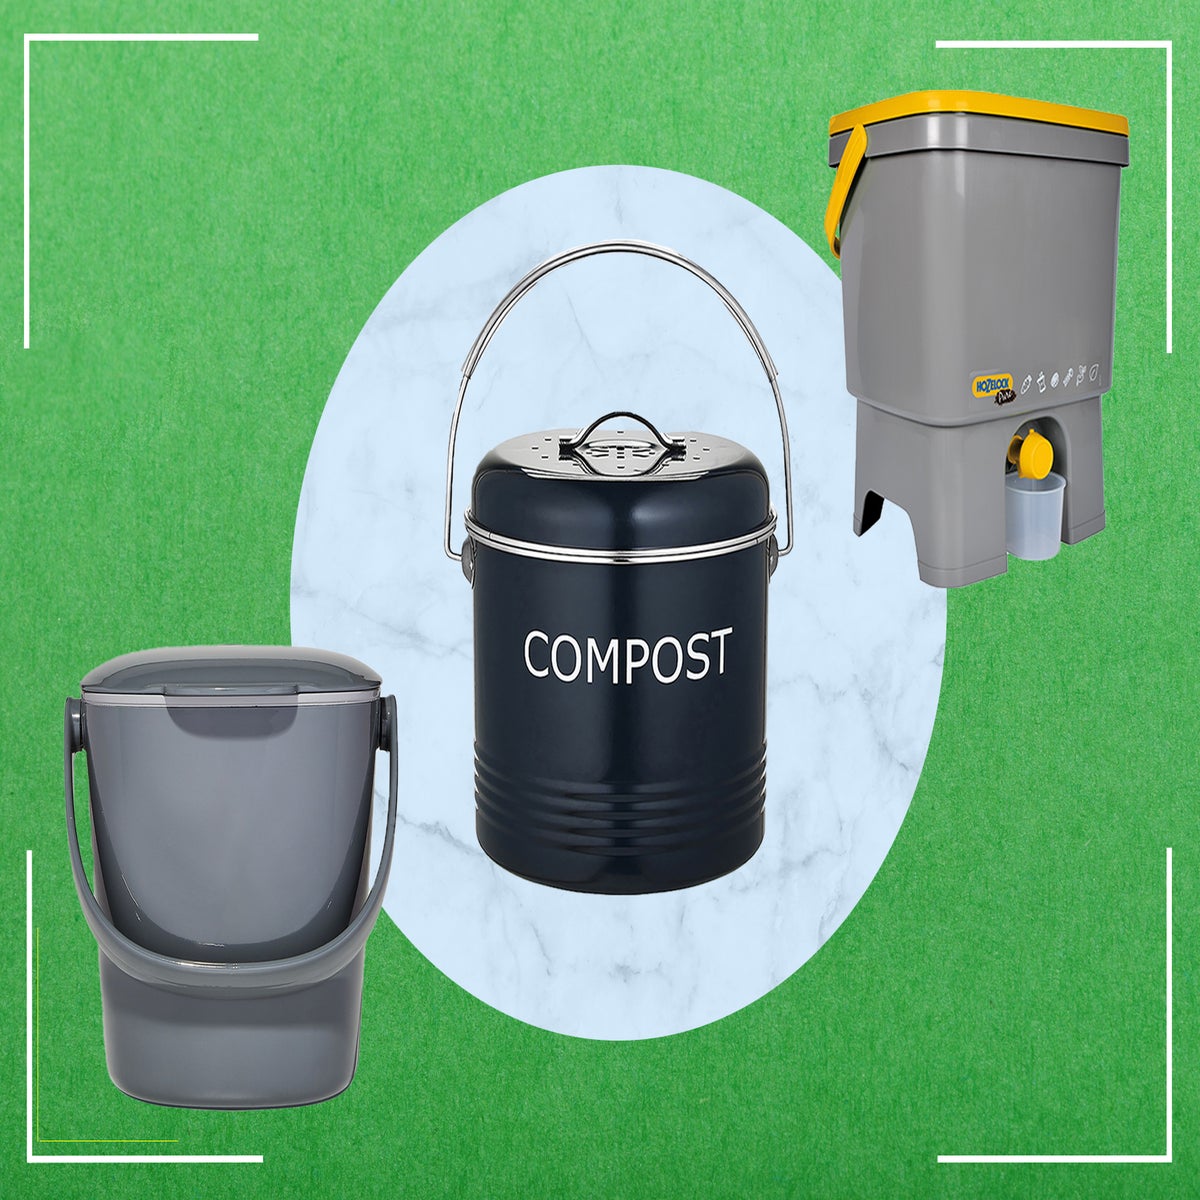 https://static.independent.co.uk/2021/01/04/10/indybest%20compost%20bins%20main.jpg?width=1200&height=1200&fit=crop